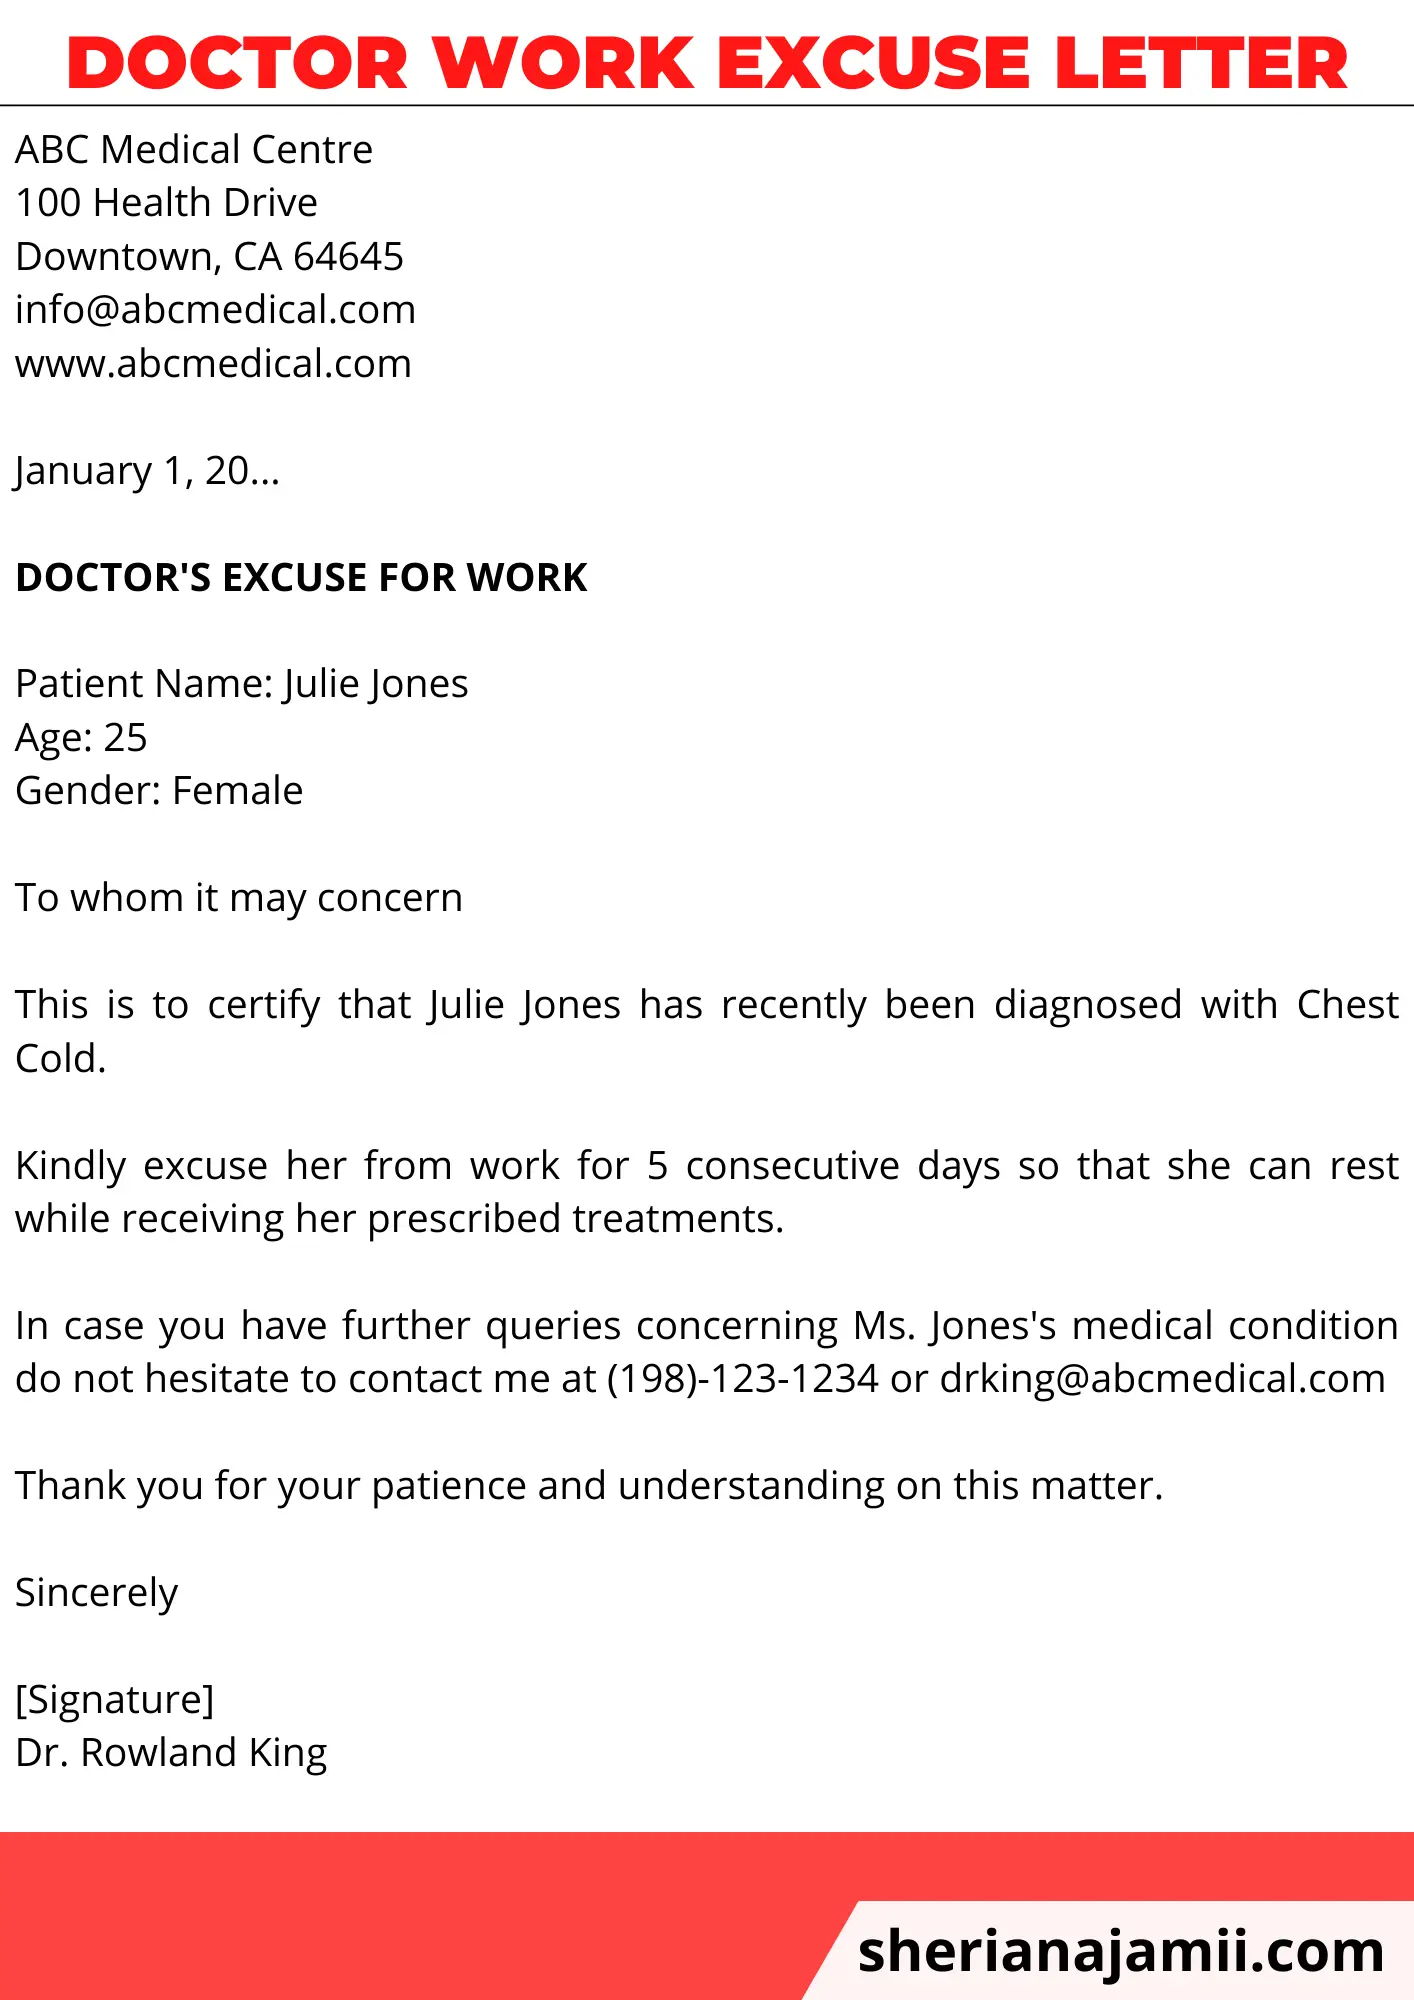 Doctor work excuse letter, work excuse letter from doctor, doctor work excuse letter sample, doctor excuse letter for work